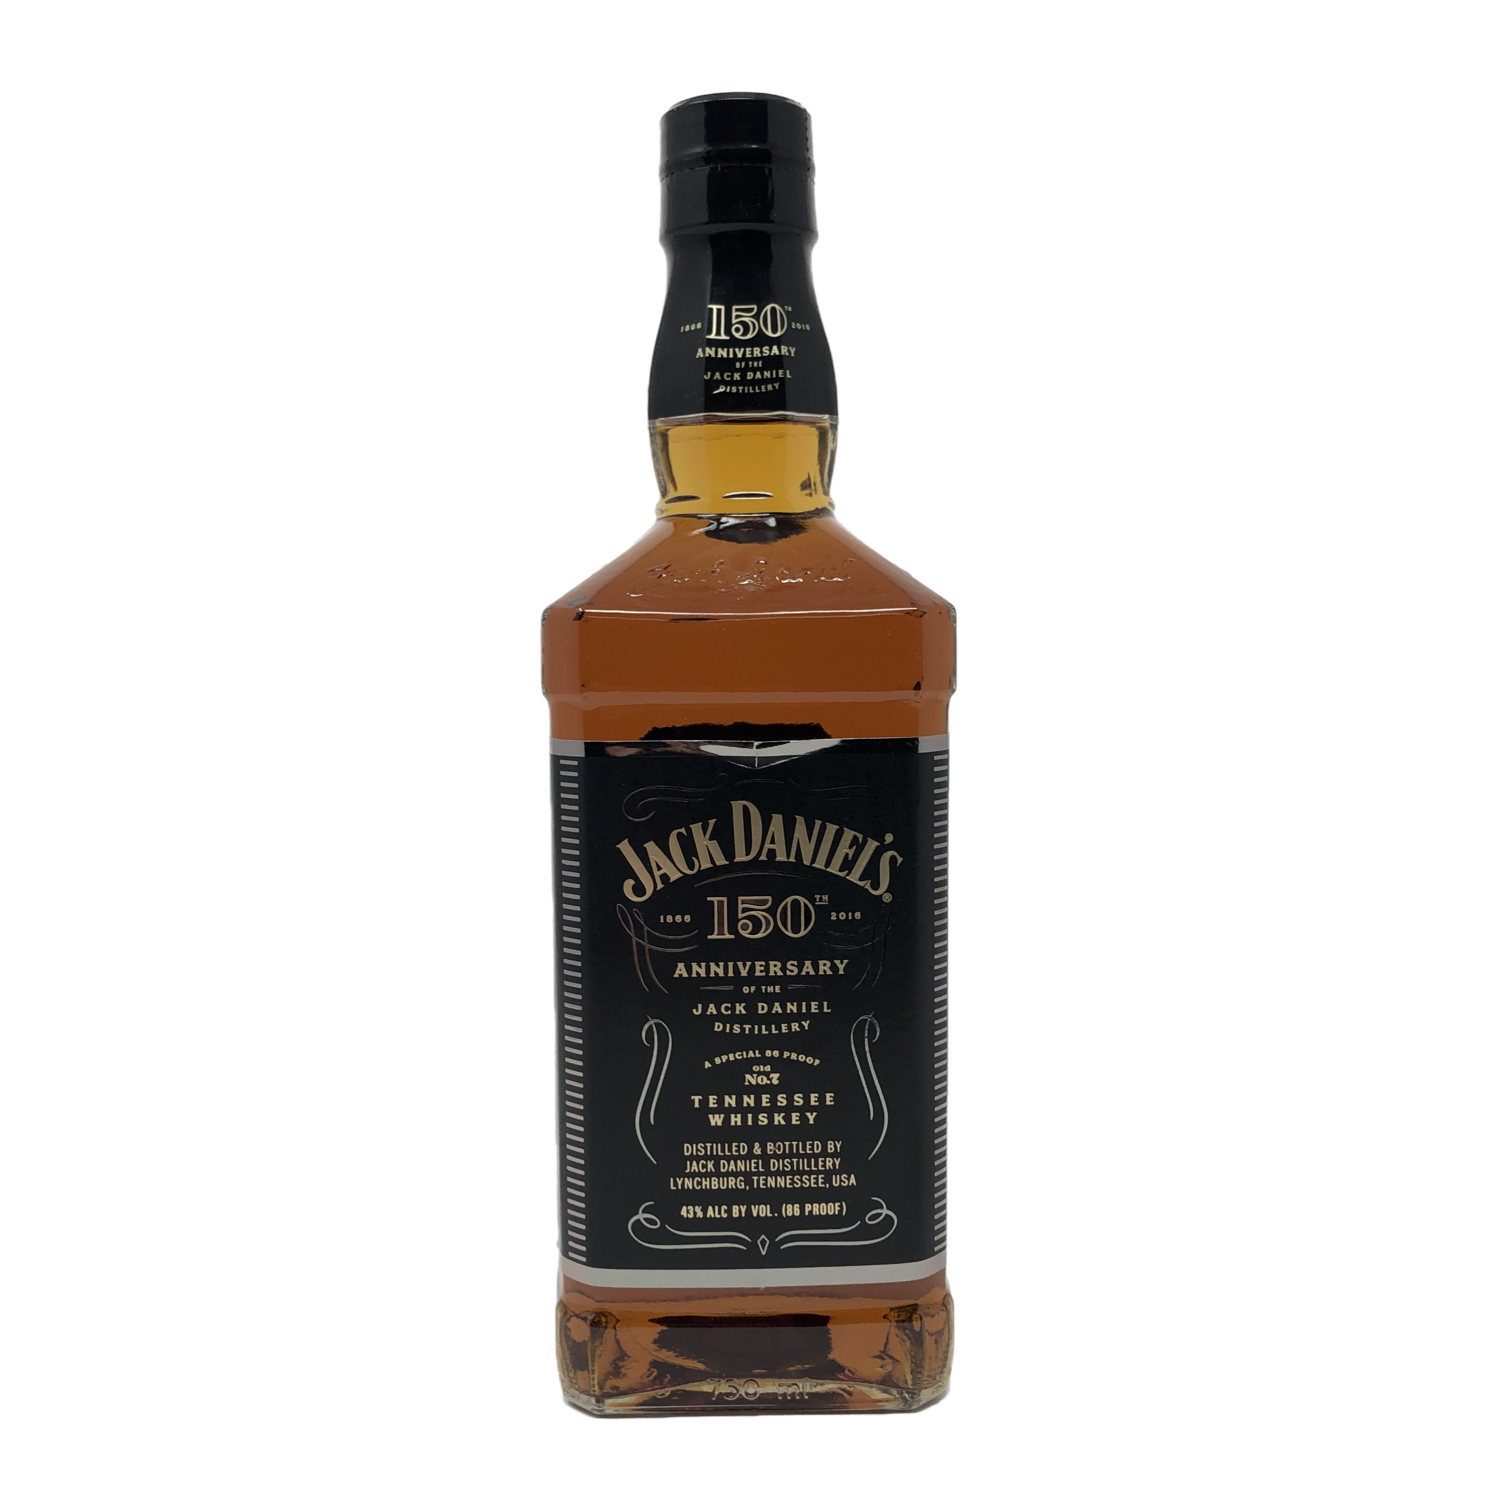 Jack Daniel's 150th Anniversary Tennessee Whiskey